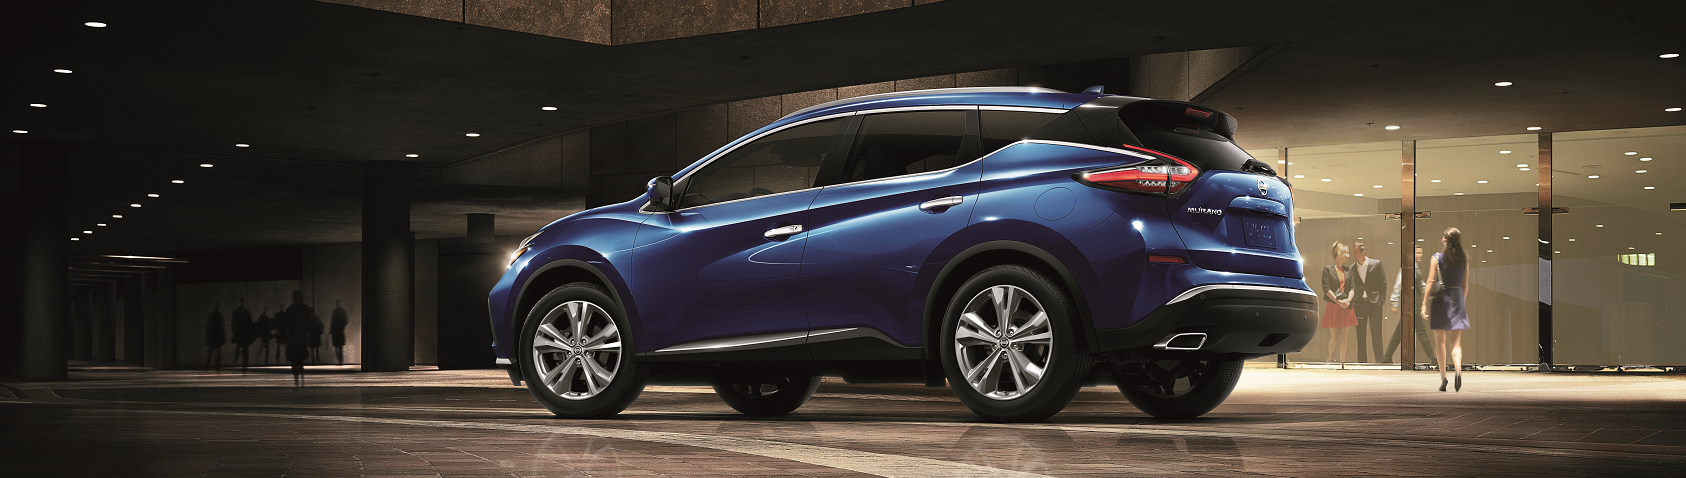 2021 NISSAN MURANO SAFETY RATINGS